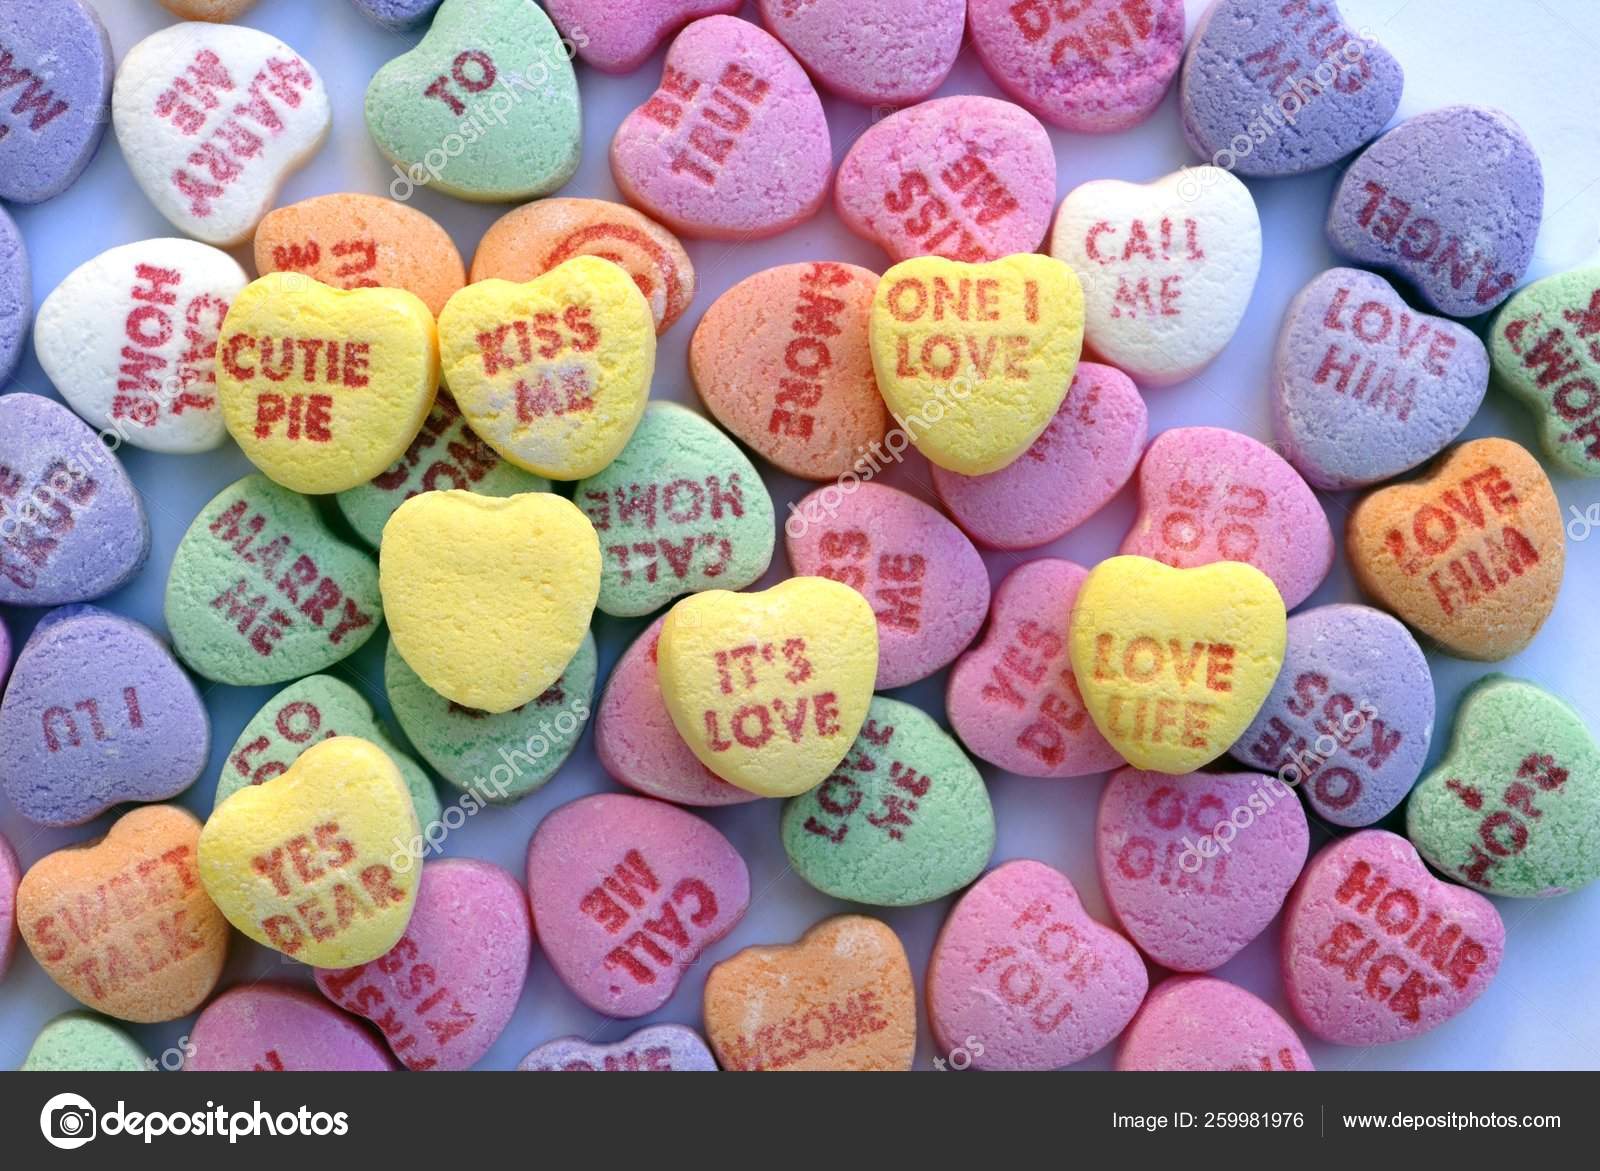 Indian Candy Hearts, Desi Valentines, South Asian Gifts, Indian